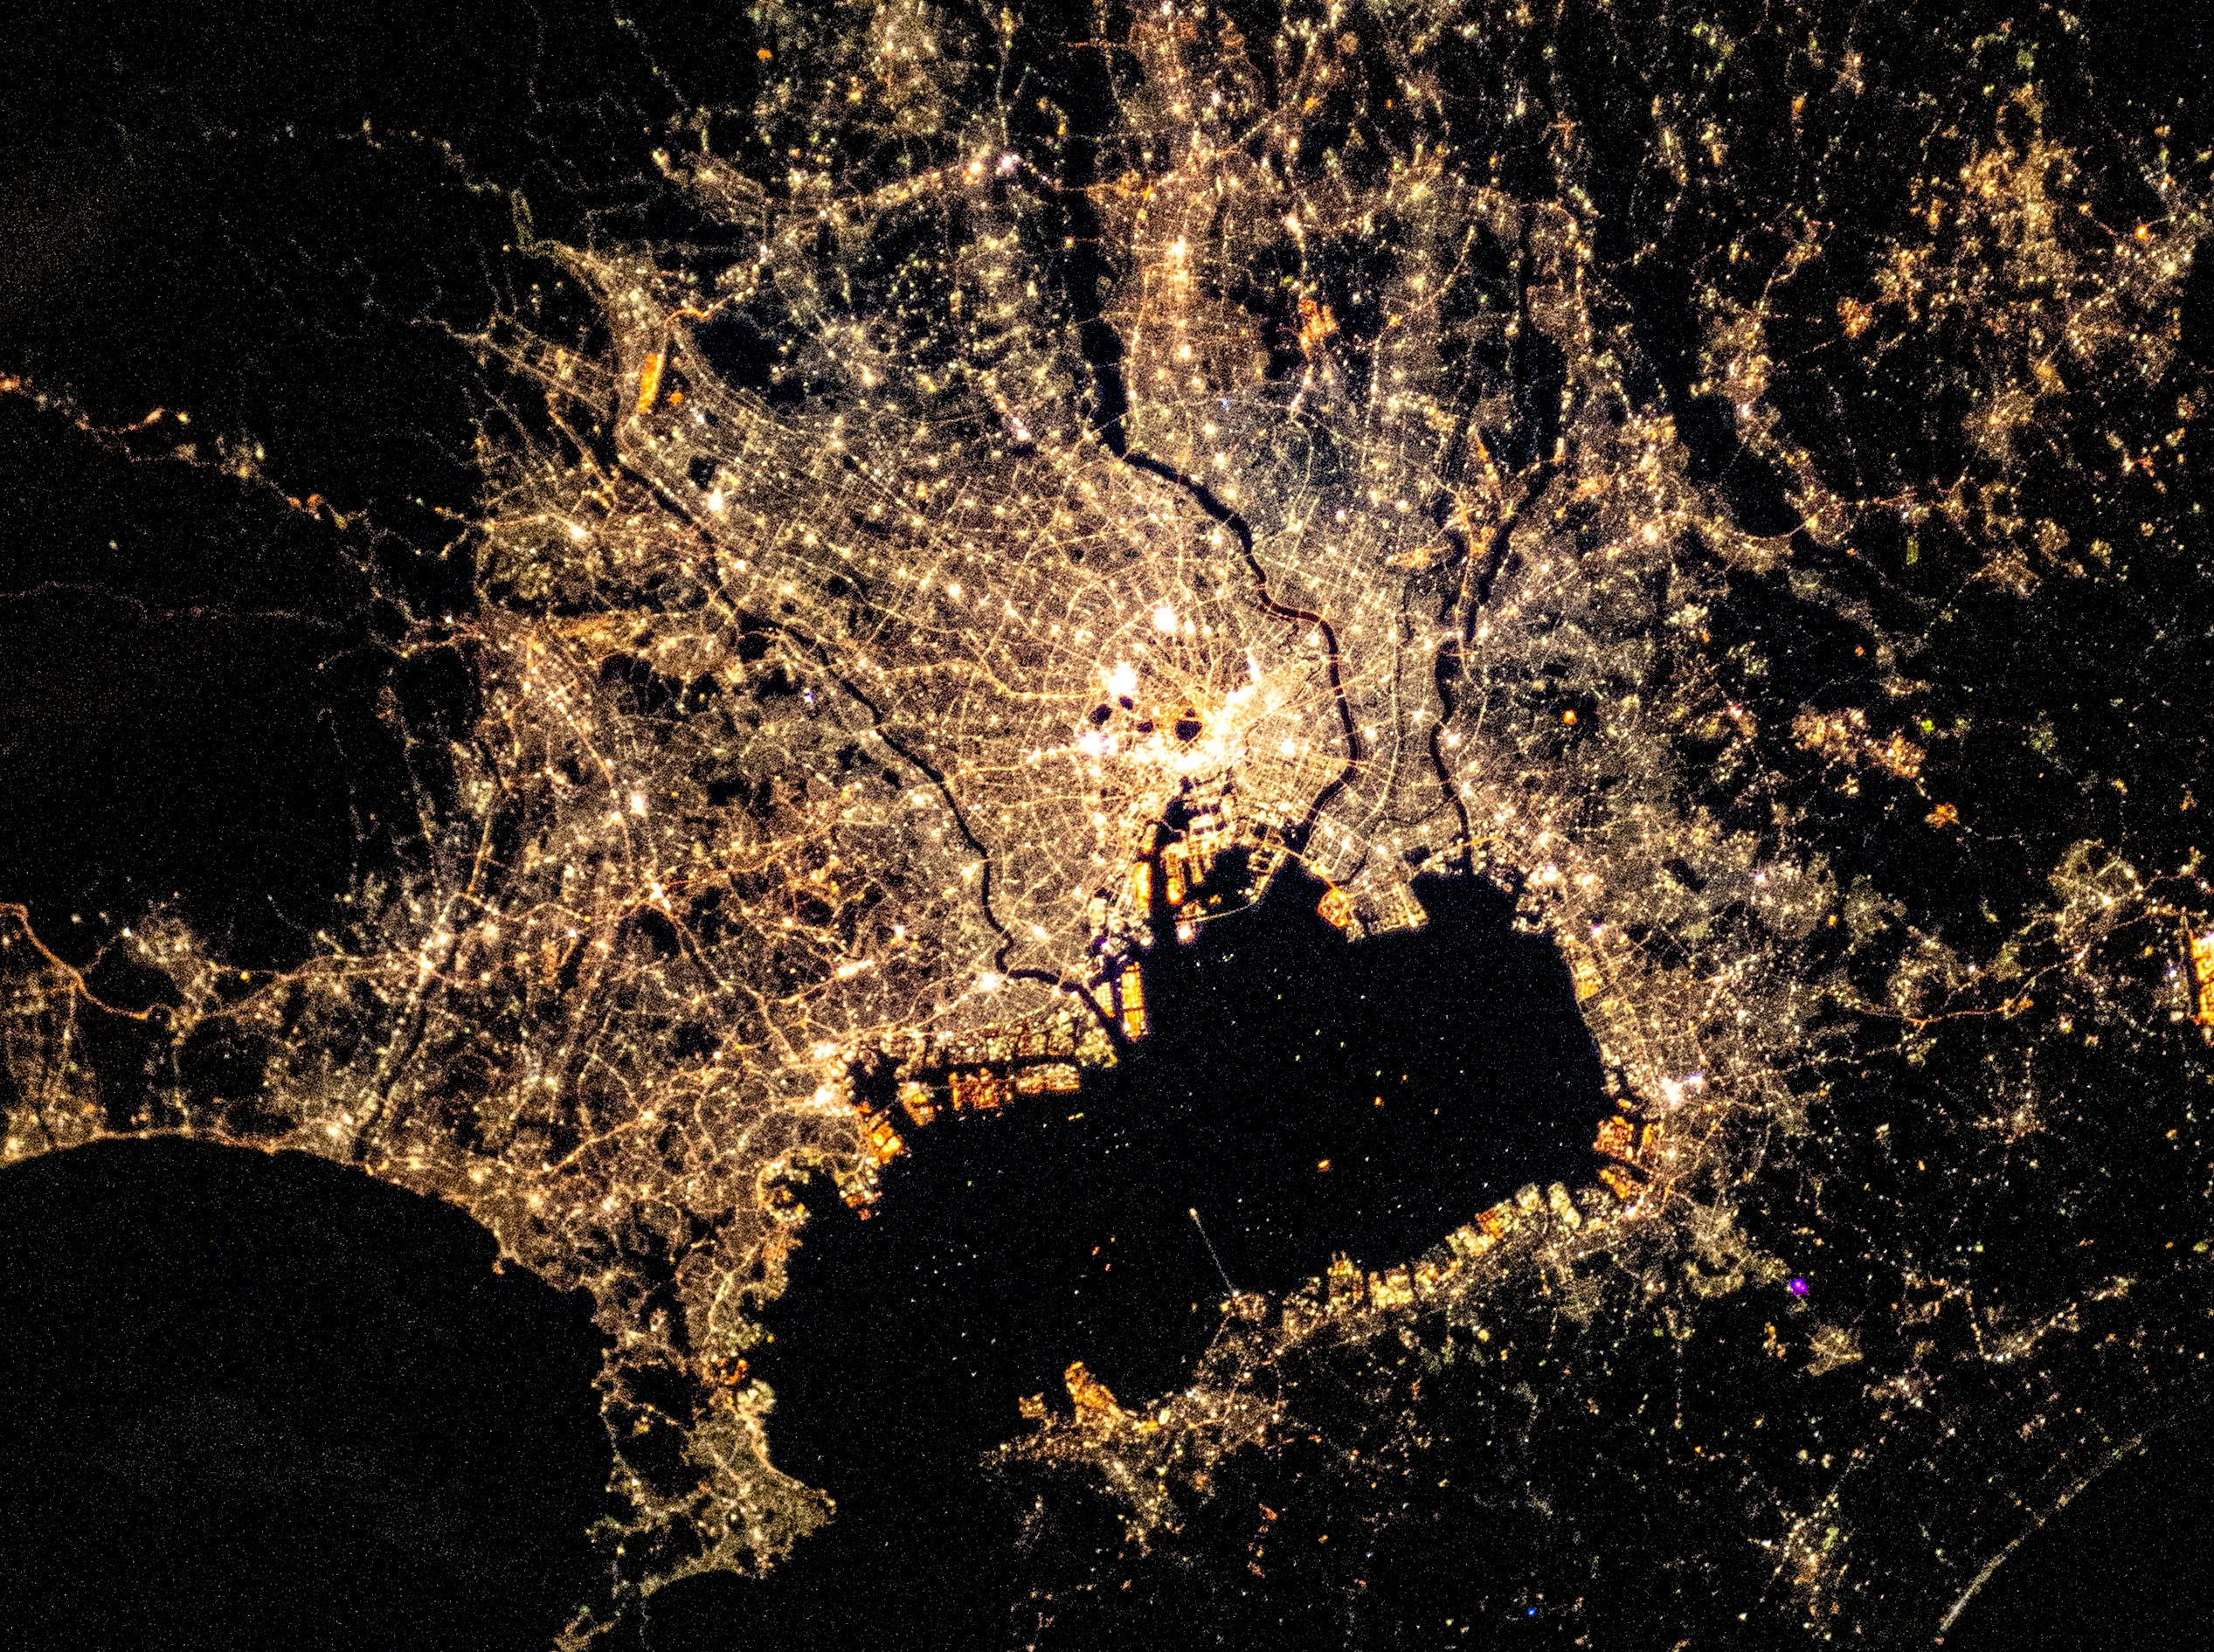 An image of the city of Tokyo at night taken by crew aboard the International Space Station. Scientists have used images such as this one in studies demonstrating the effects of artificial light on urban wildlife and research on the proximity of urban greenspaces to residential areas. Credit: NASA.